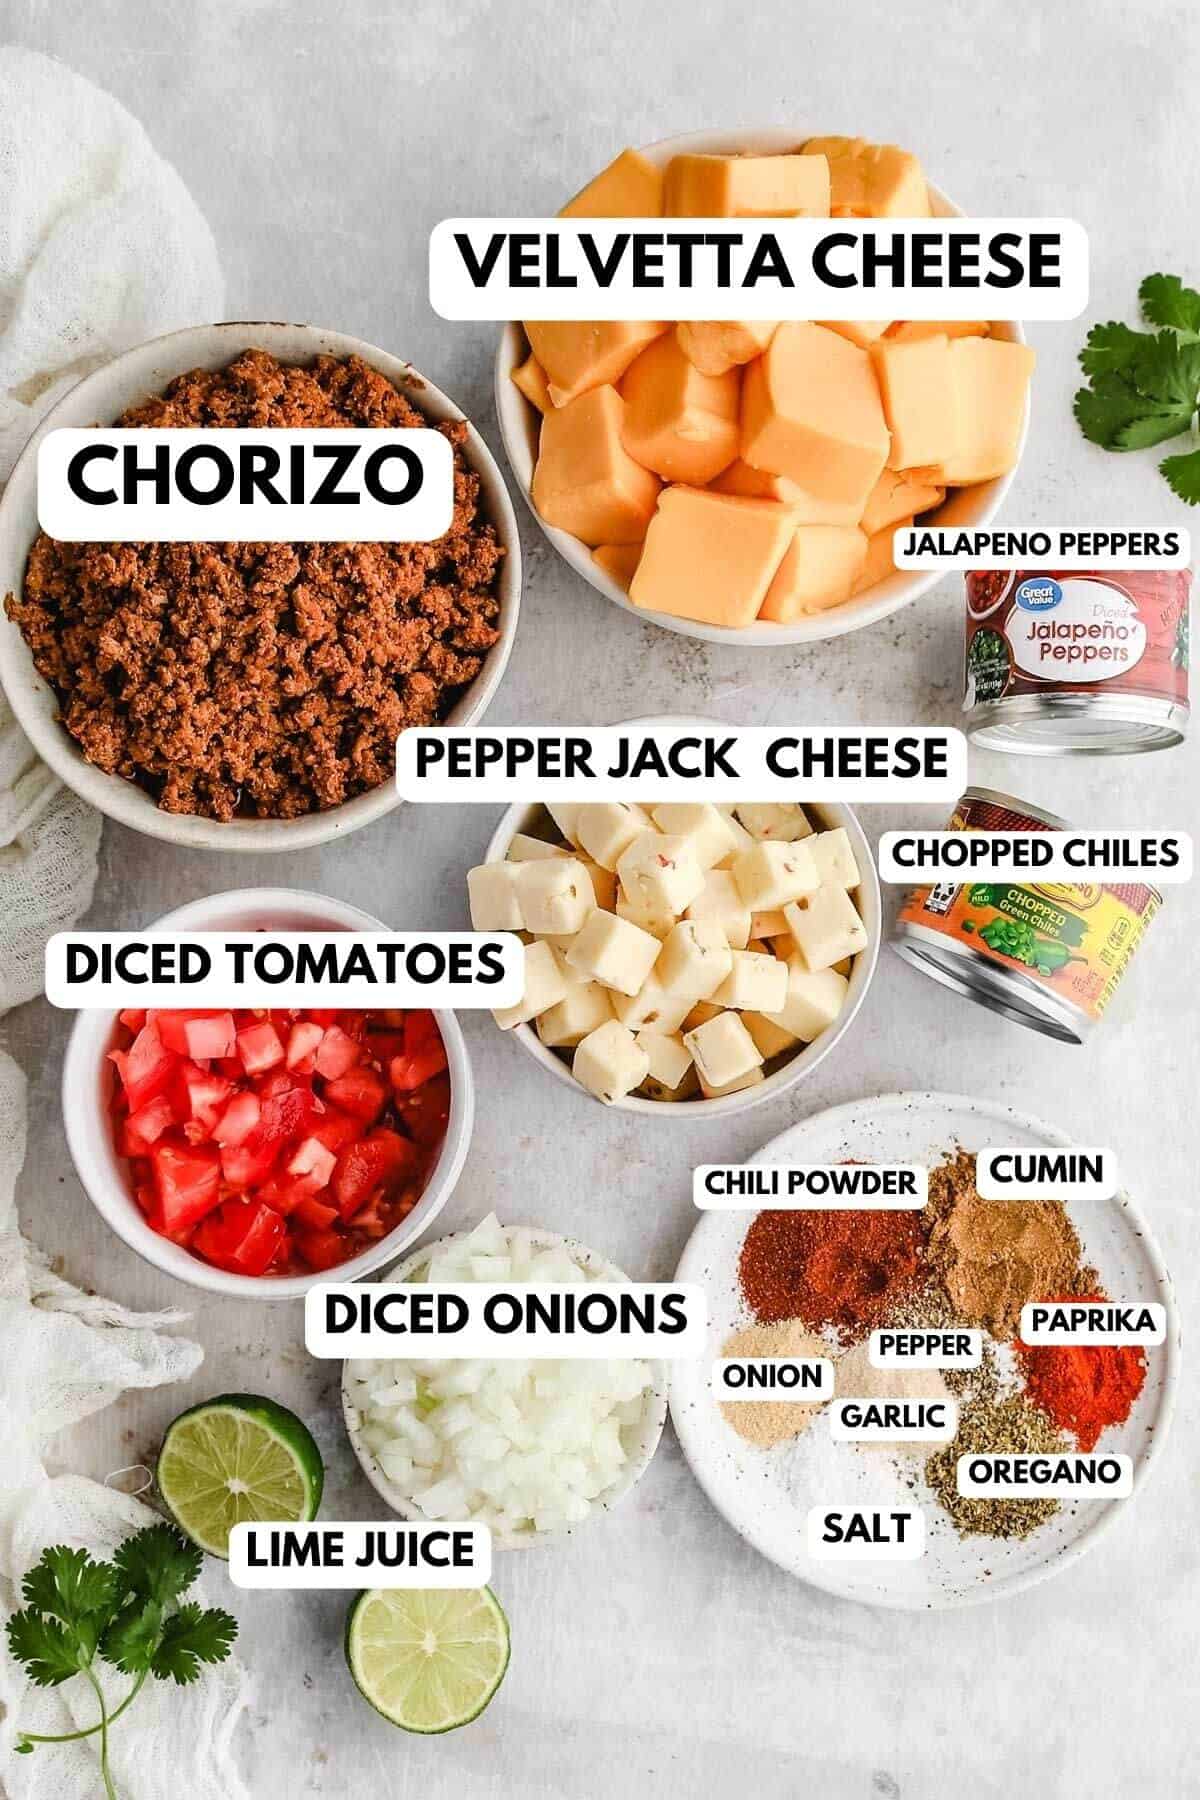 labeled ingredients to make this recipe